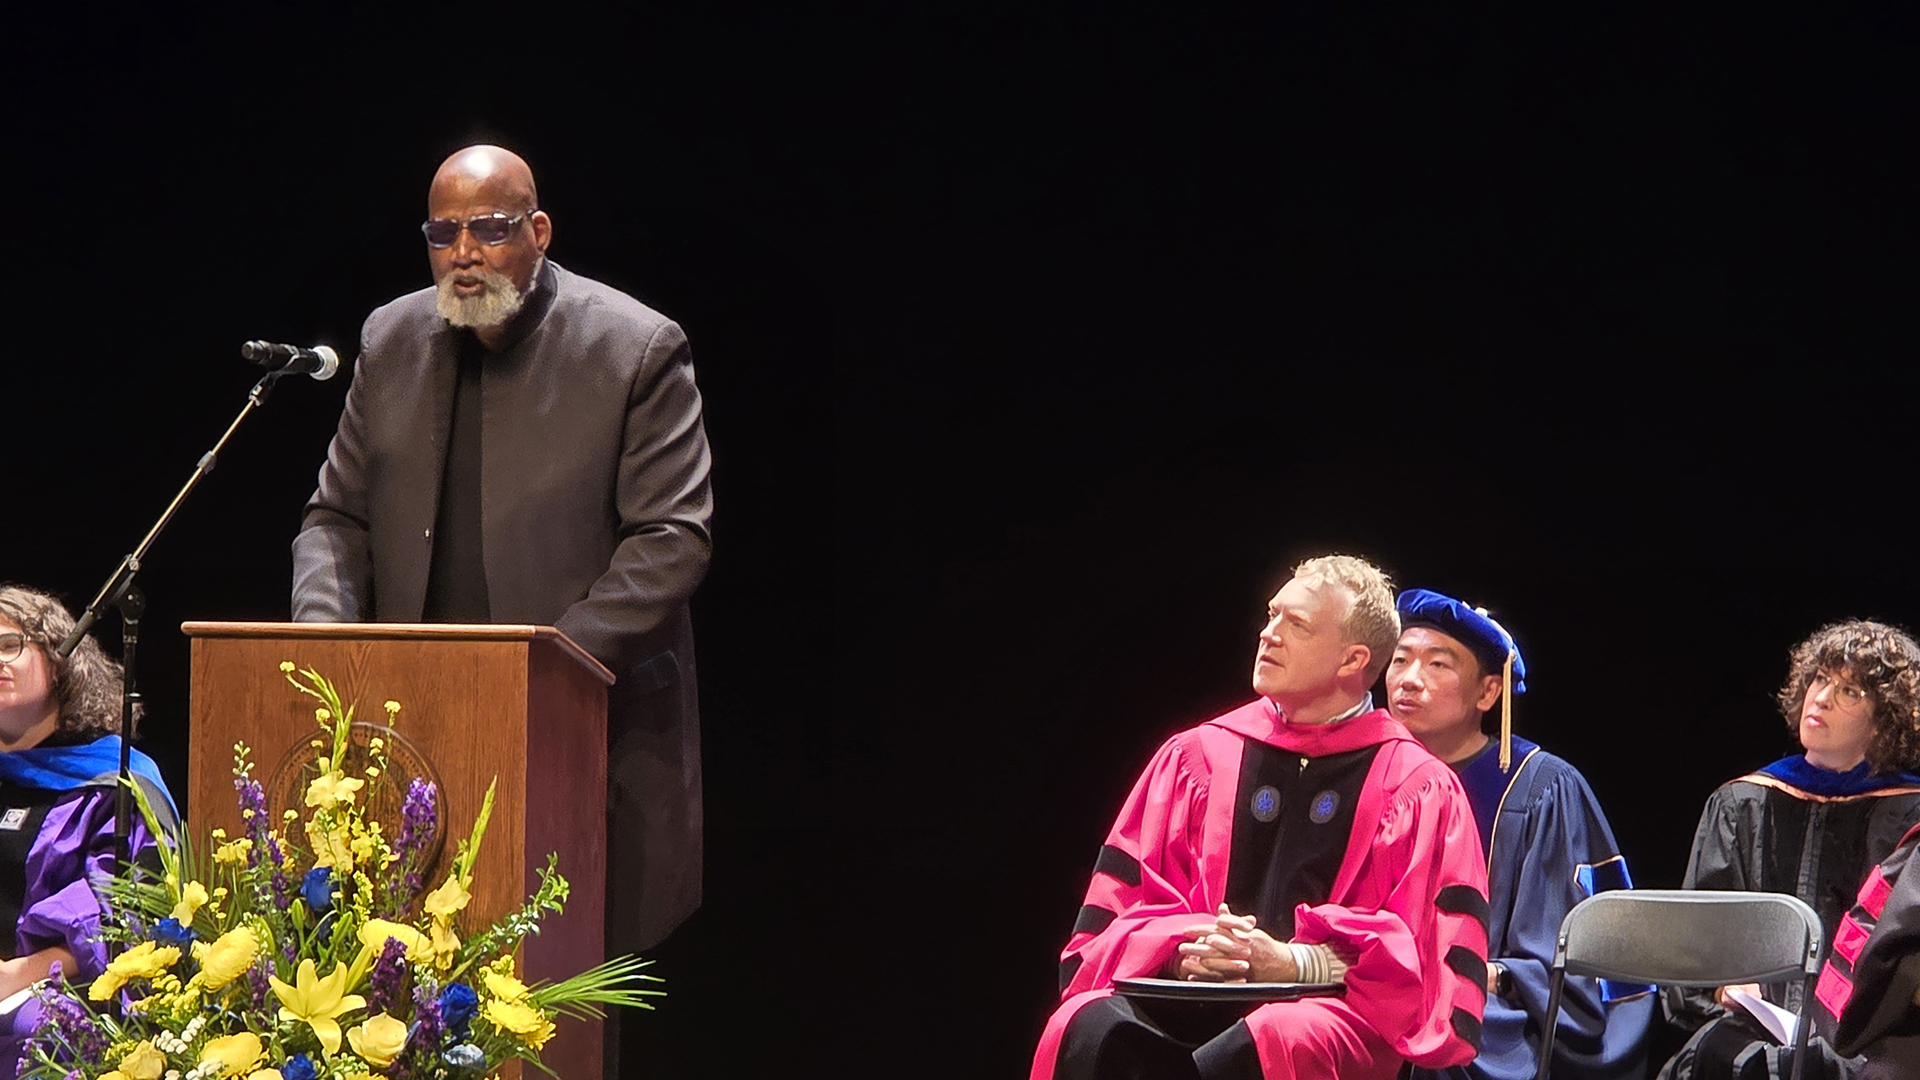 Harry Edwards gives a commencement speech at a podium